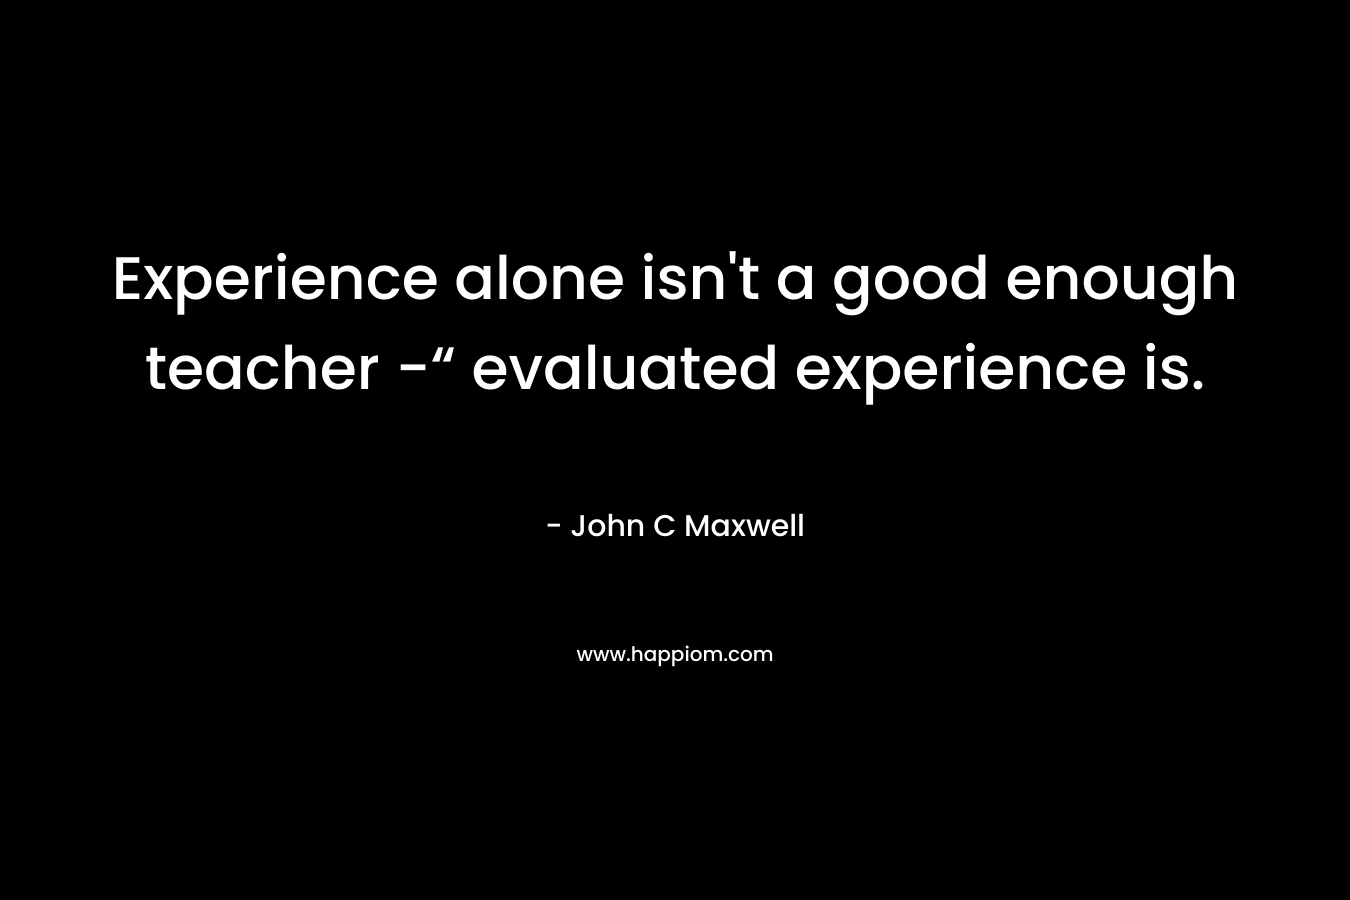 Experience alone isn't a good enough teacher -“ evaluated experience is.